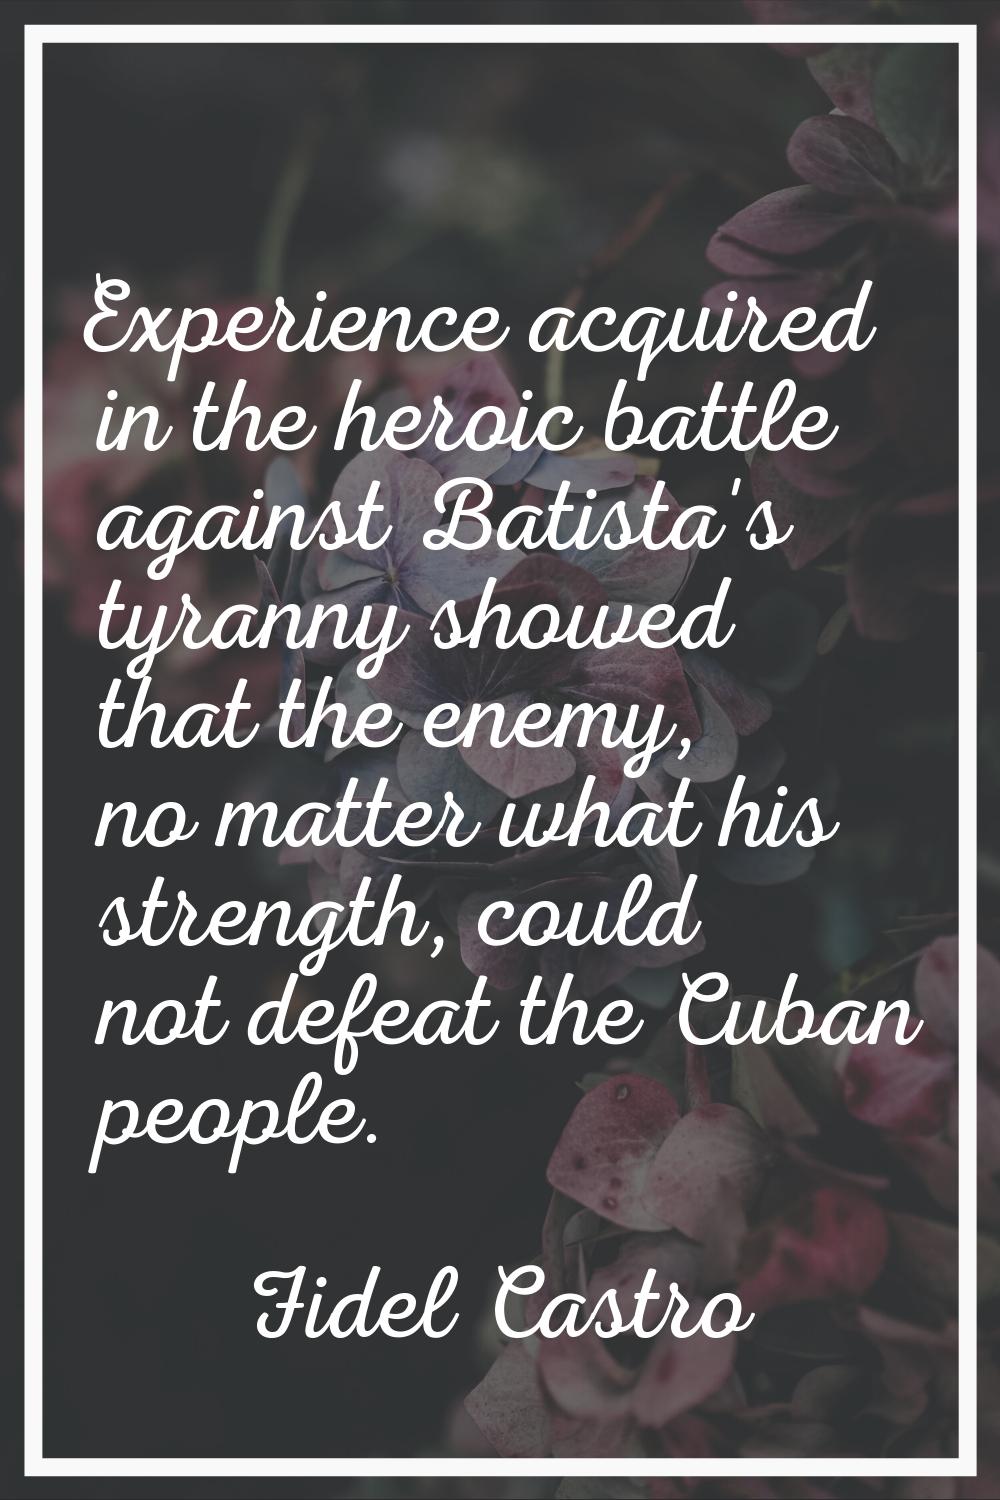 Experience acquired in the heroic battle against Batista's tyranny showed that the enemy, no matter